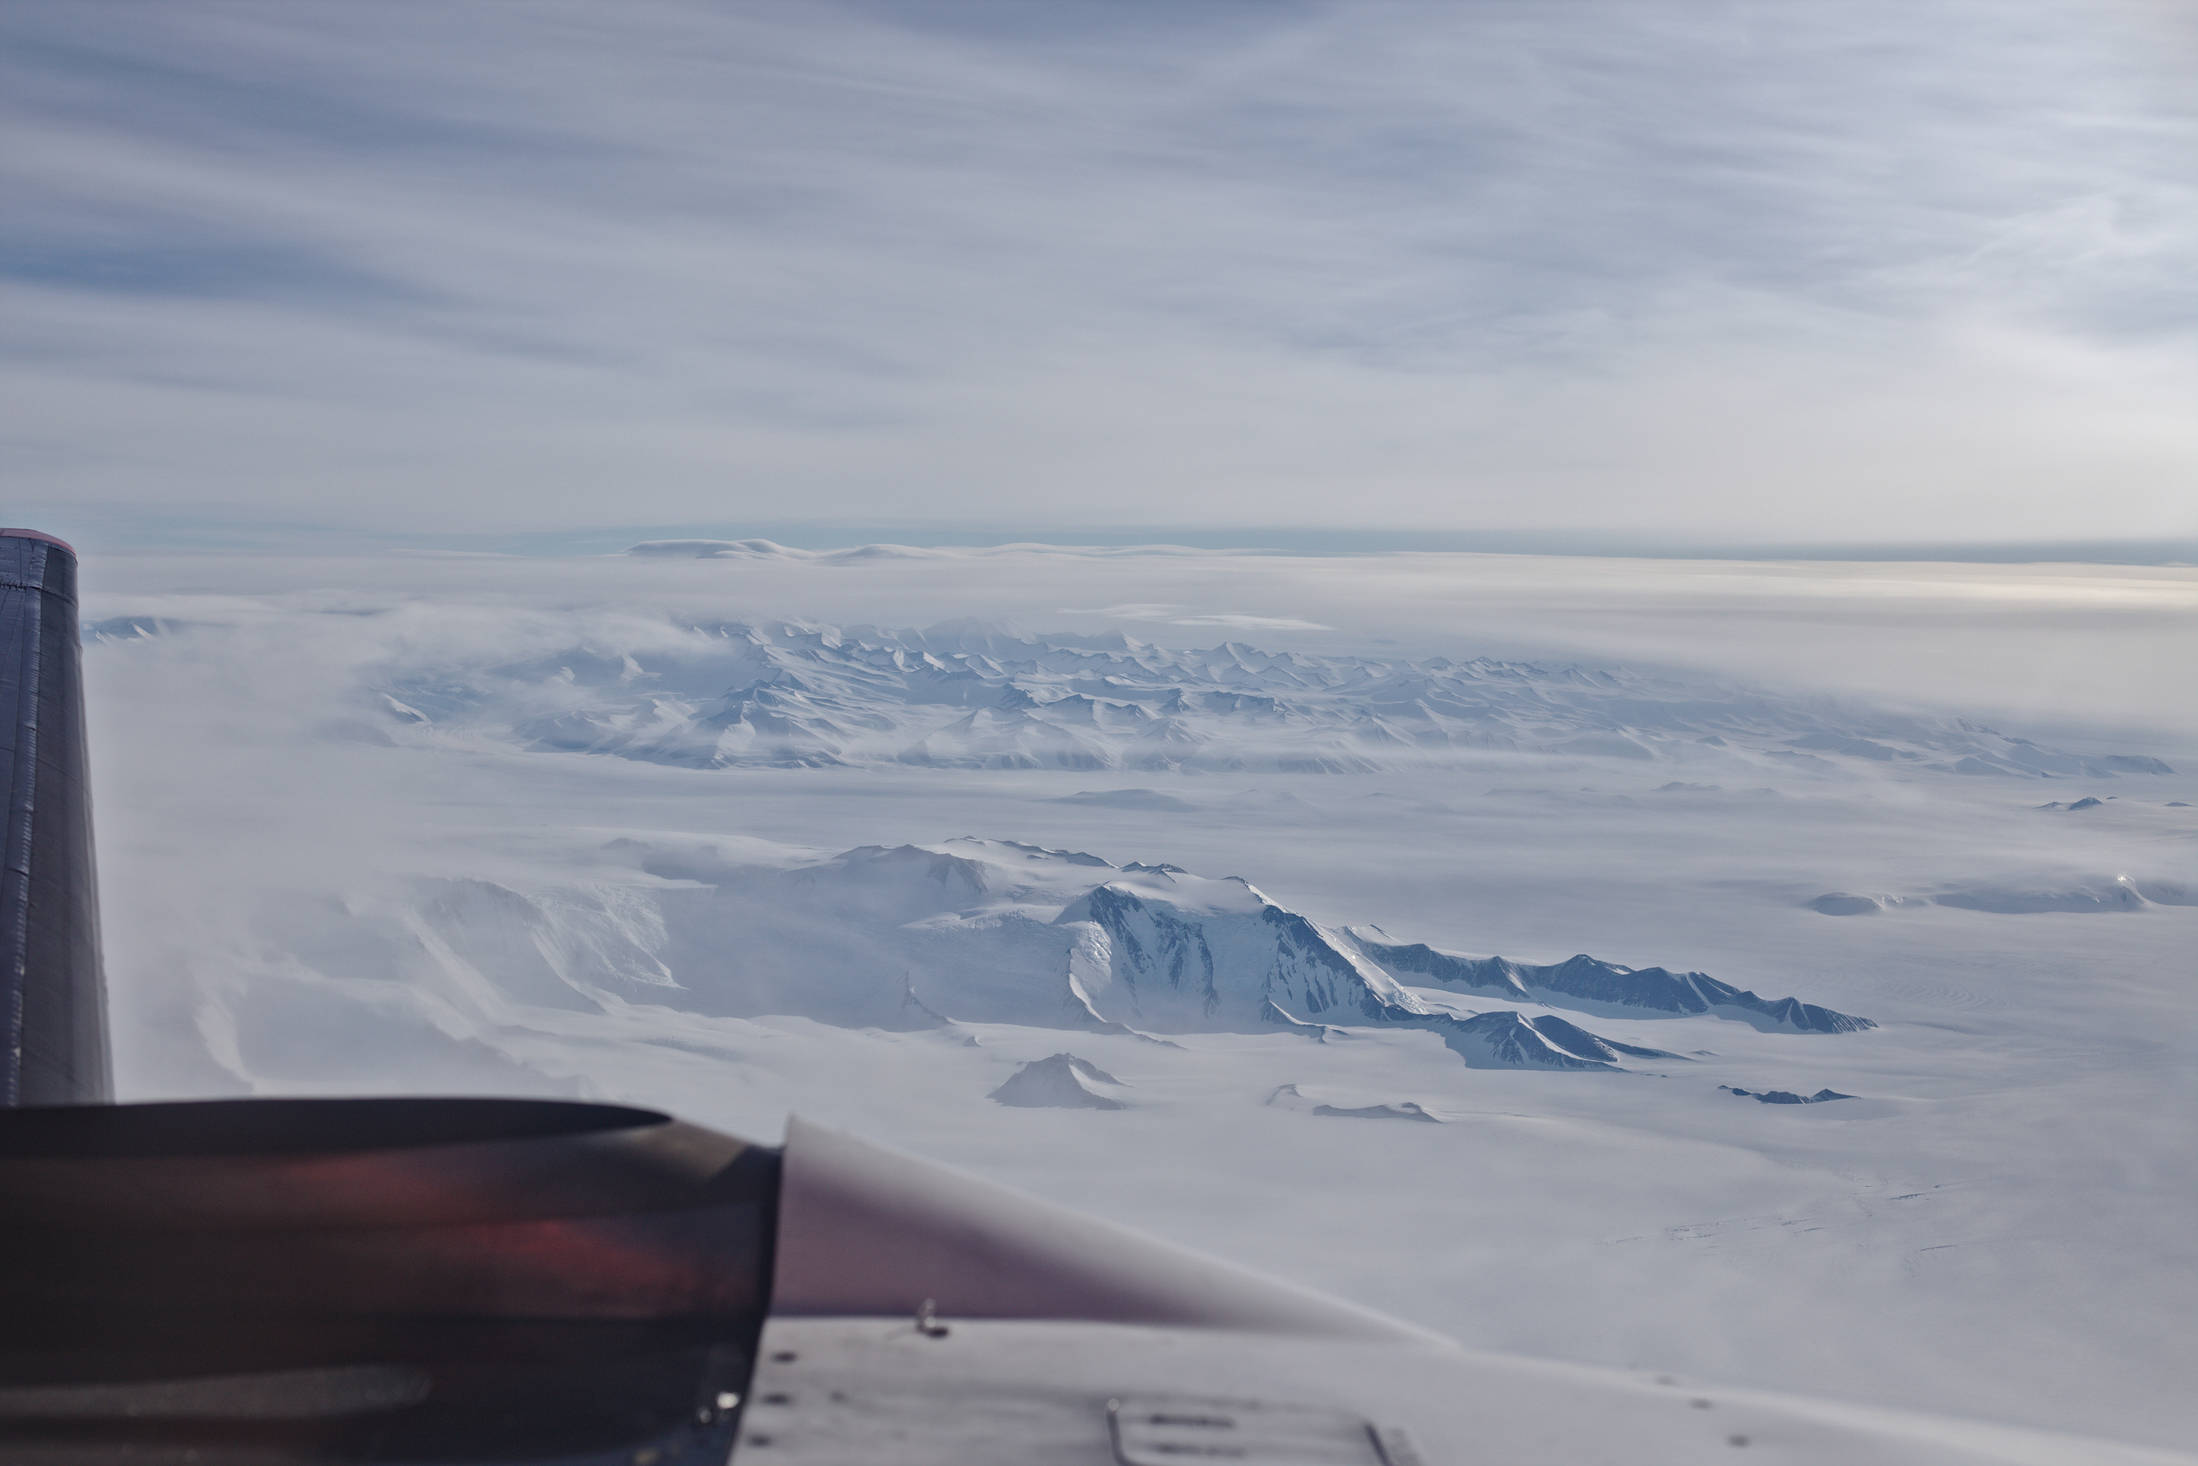 From here it's another two hours of flying across the Ross ice shelf. More mountains are visible along the way